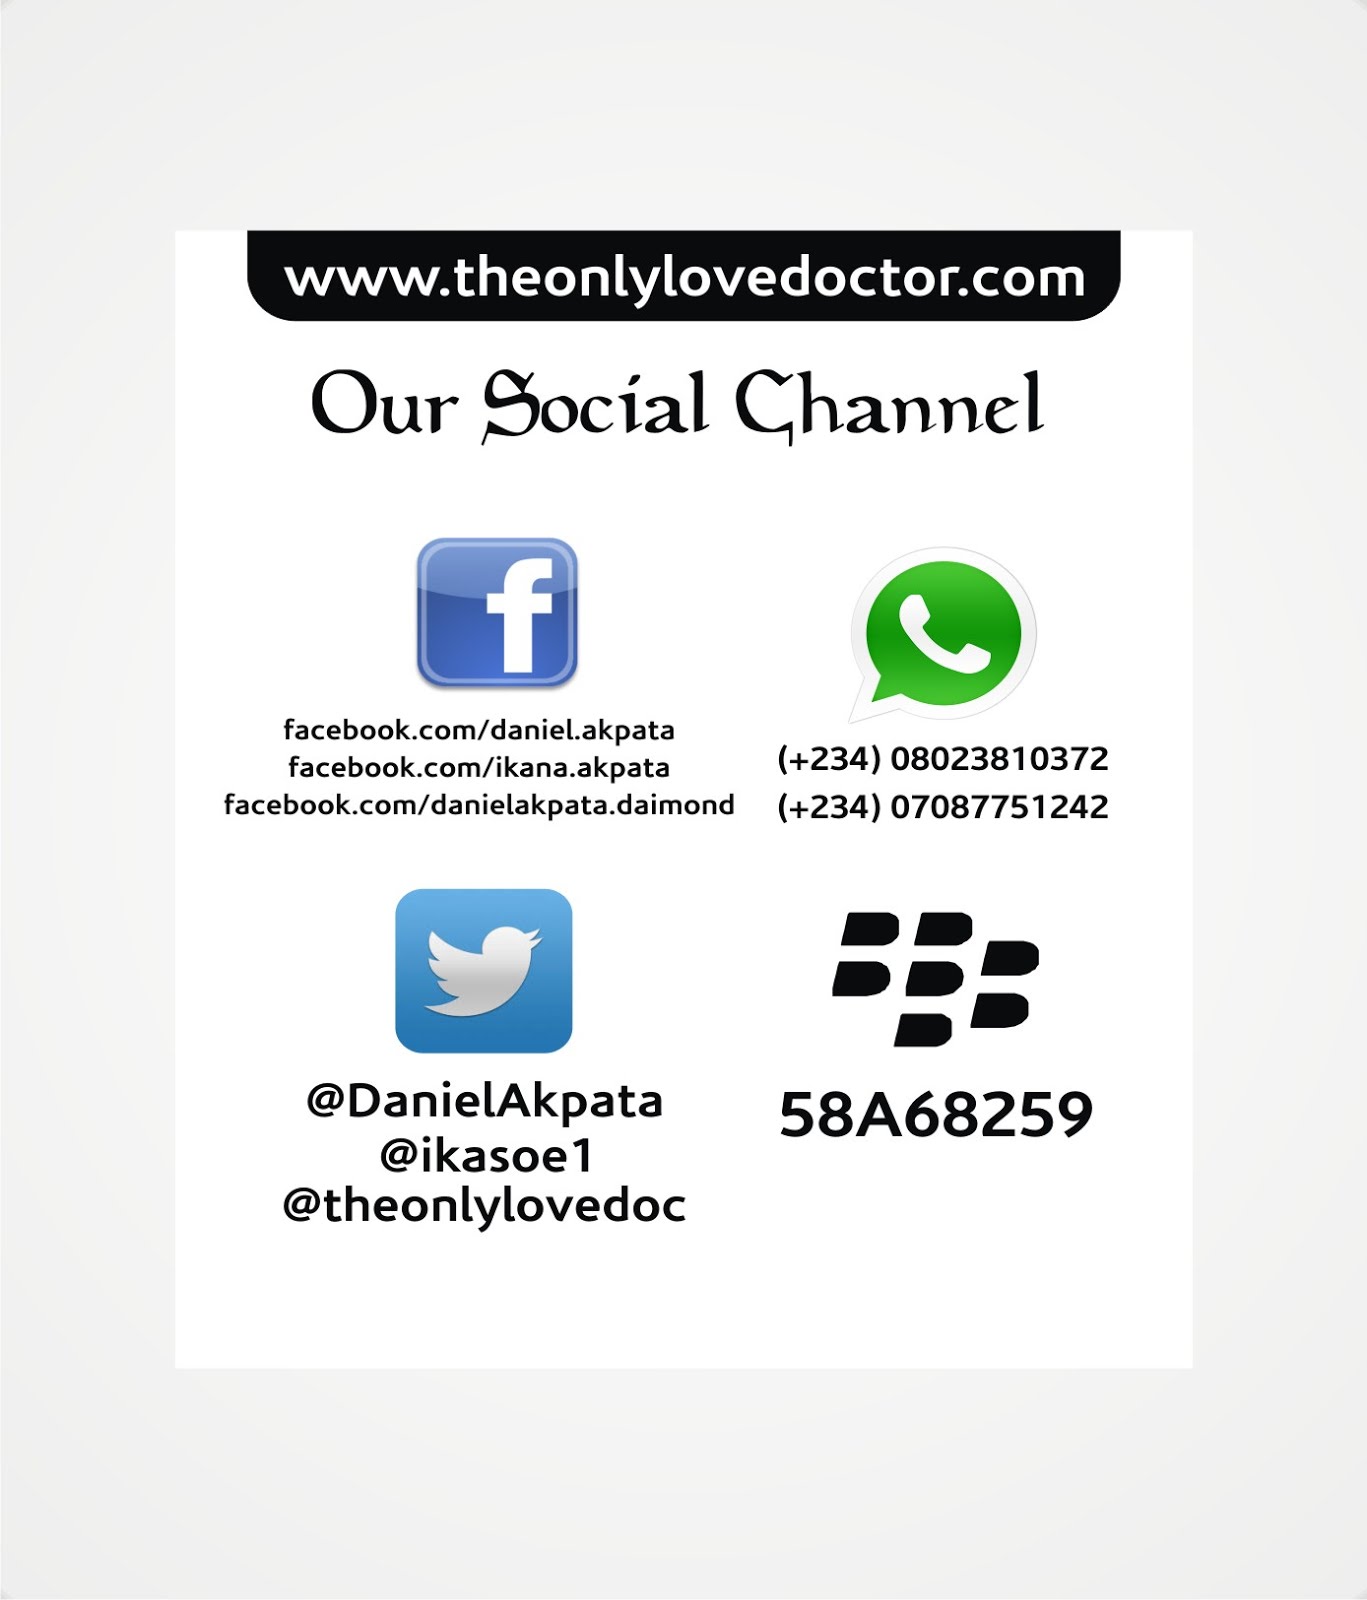 OUR SOCIAL CHANNEL